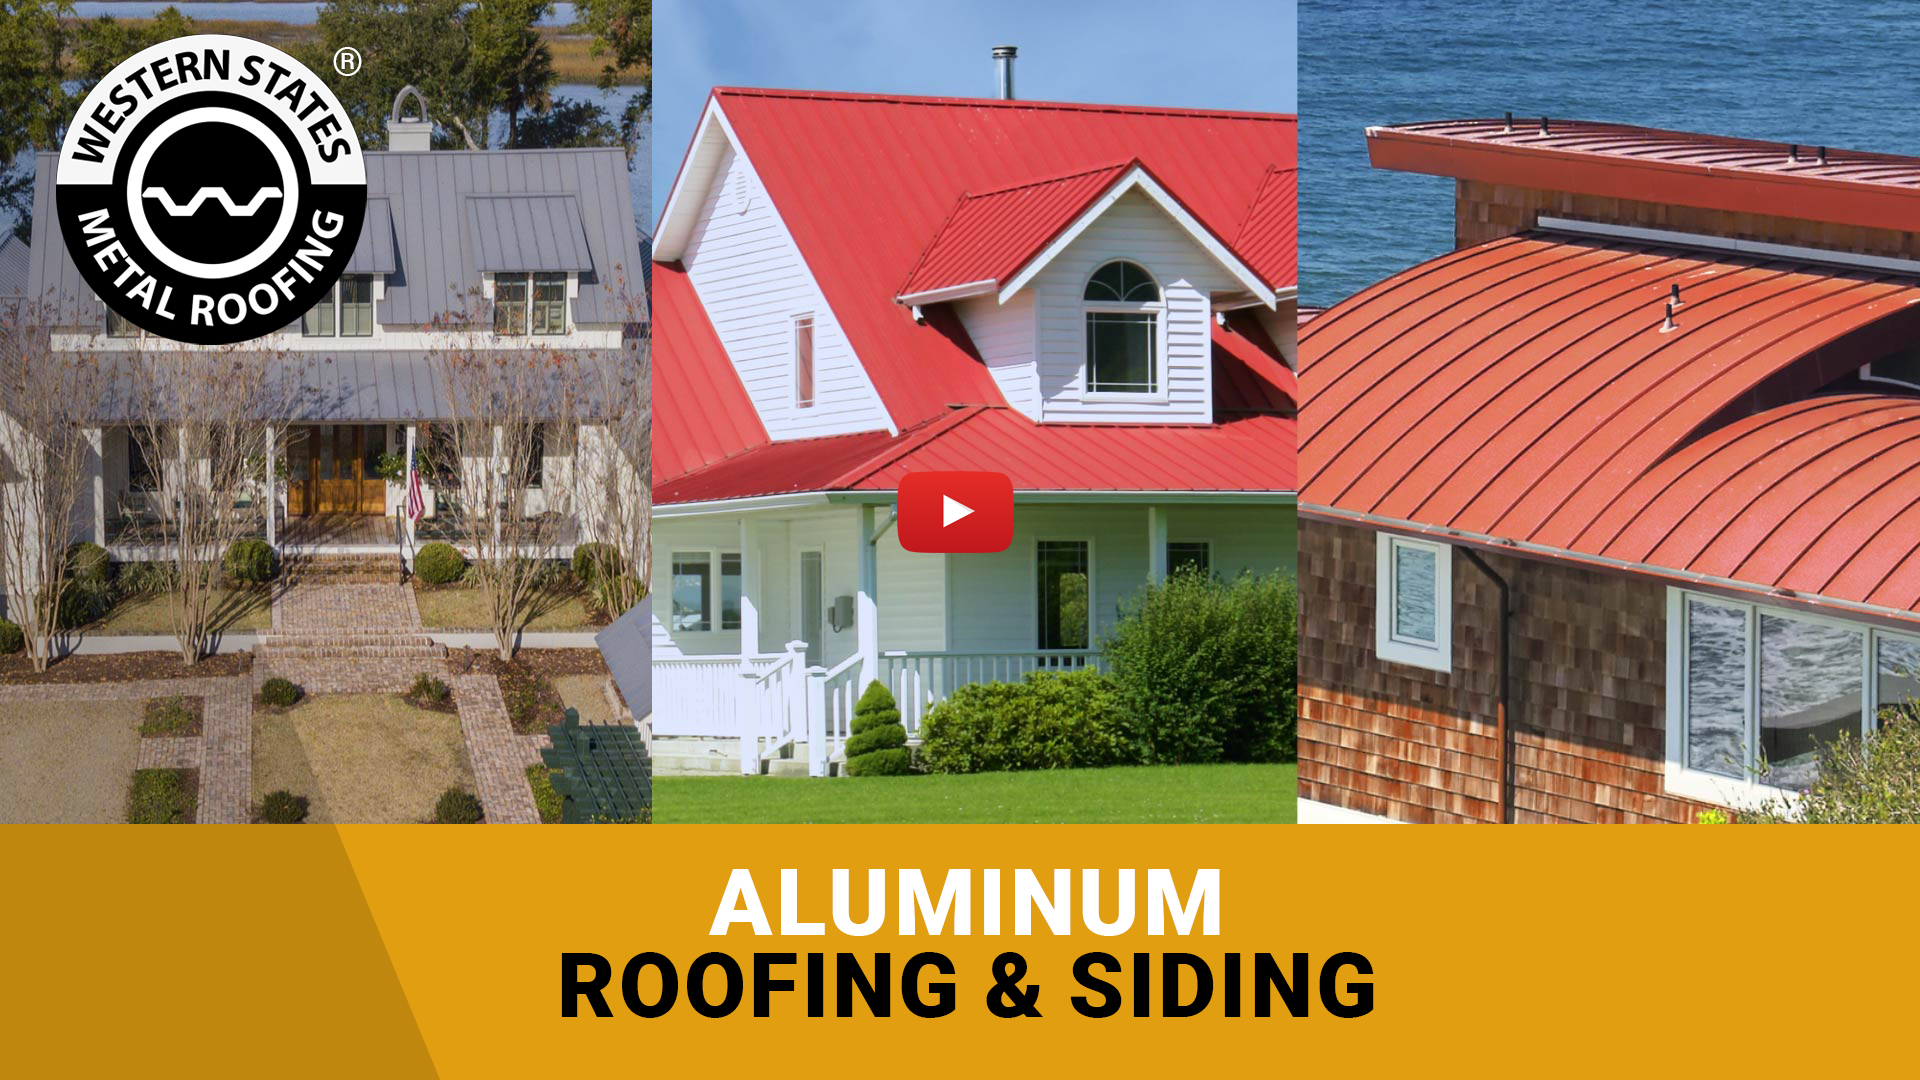 How much does aluminum roofing cost? 2023 Aluminum Pricing Guide